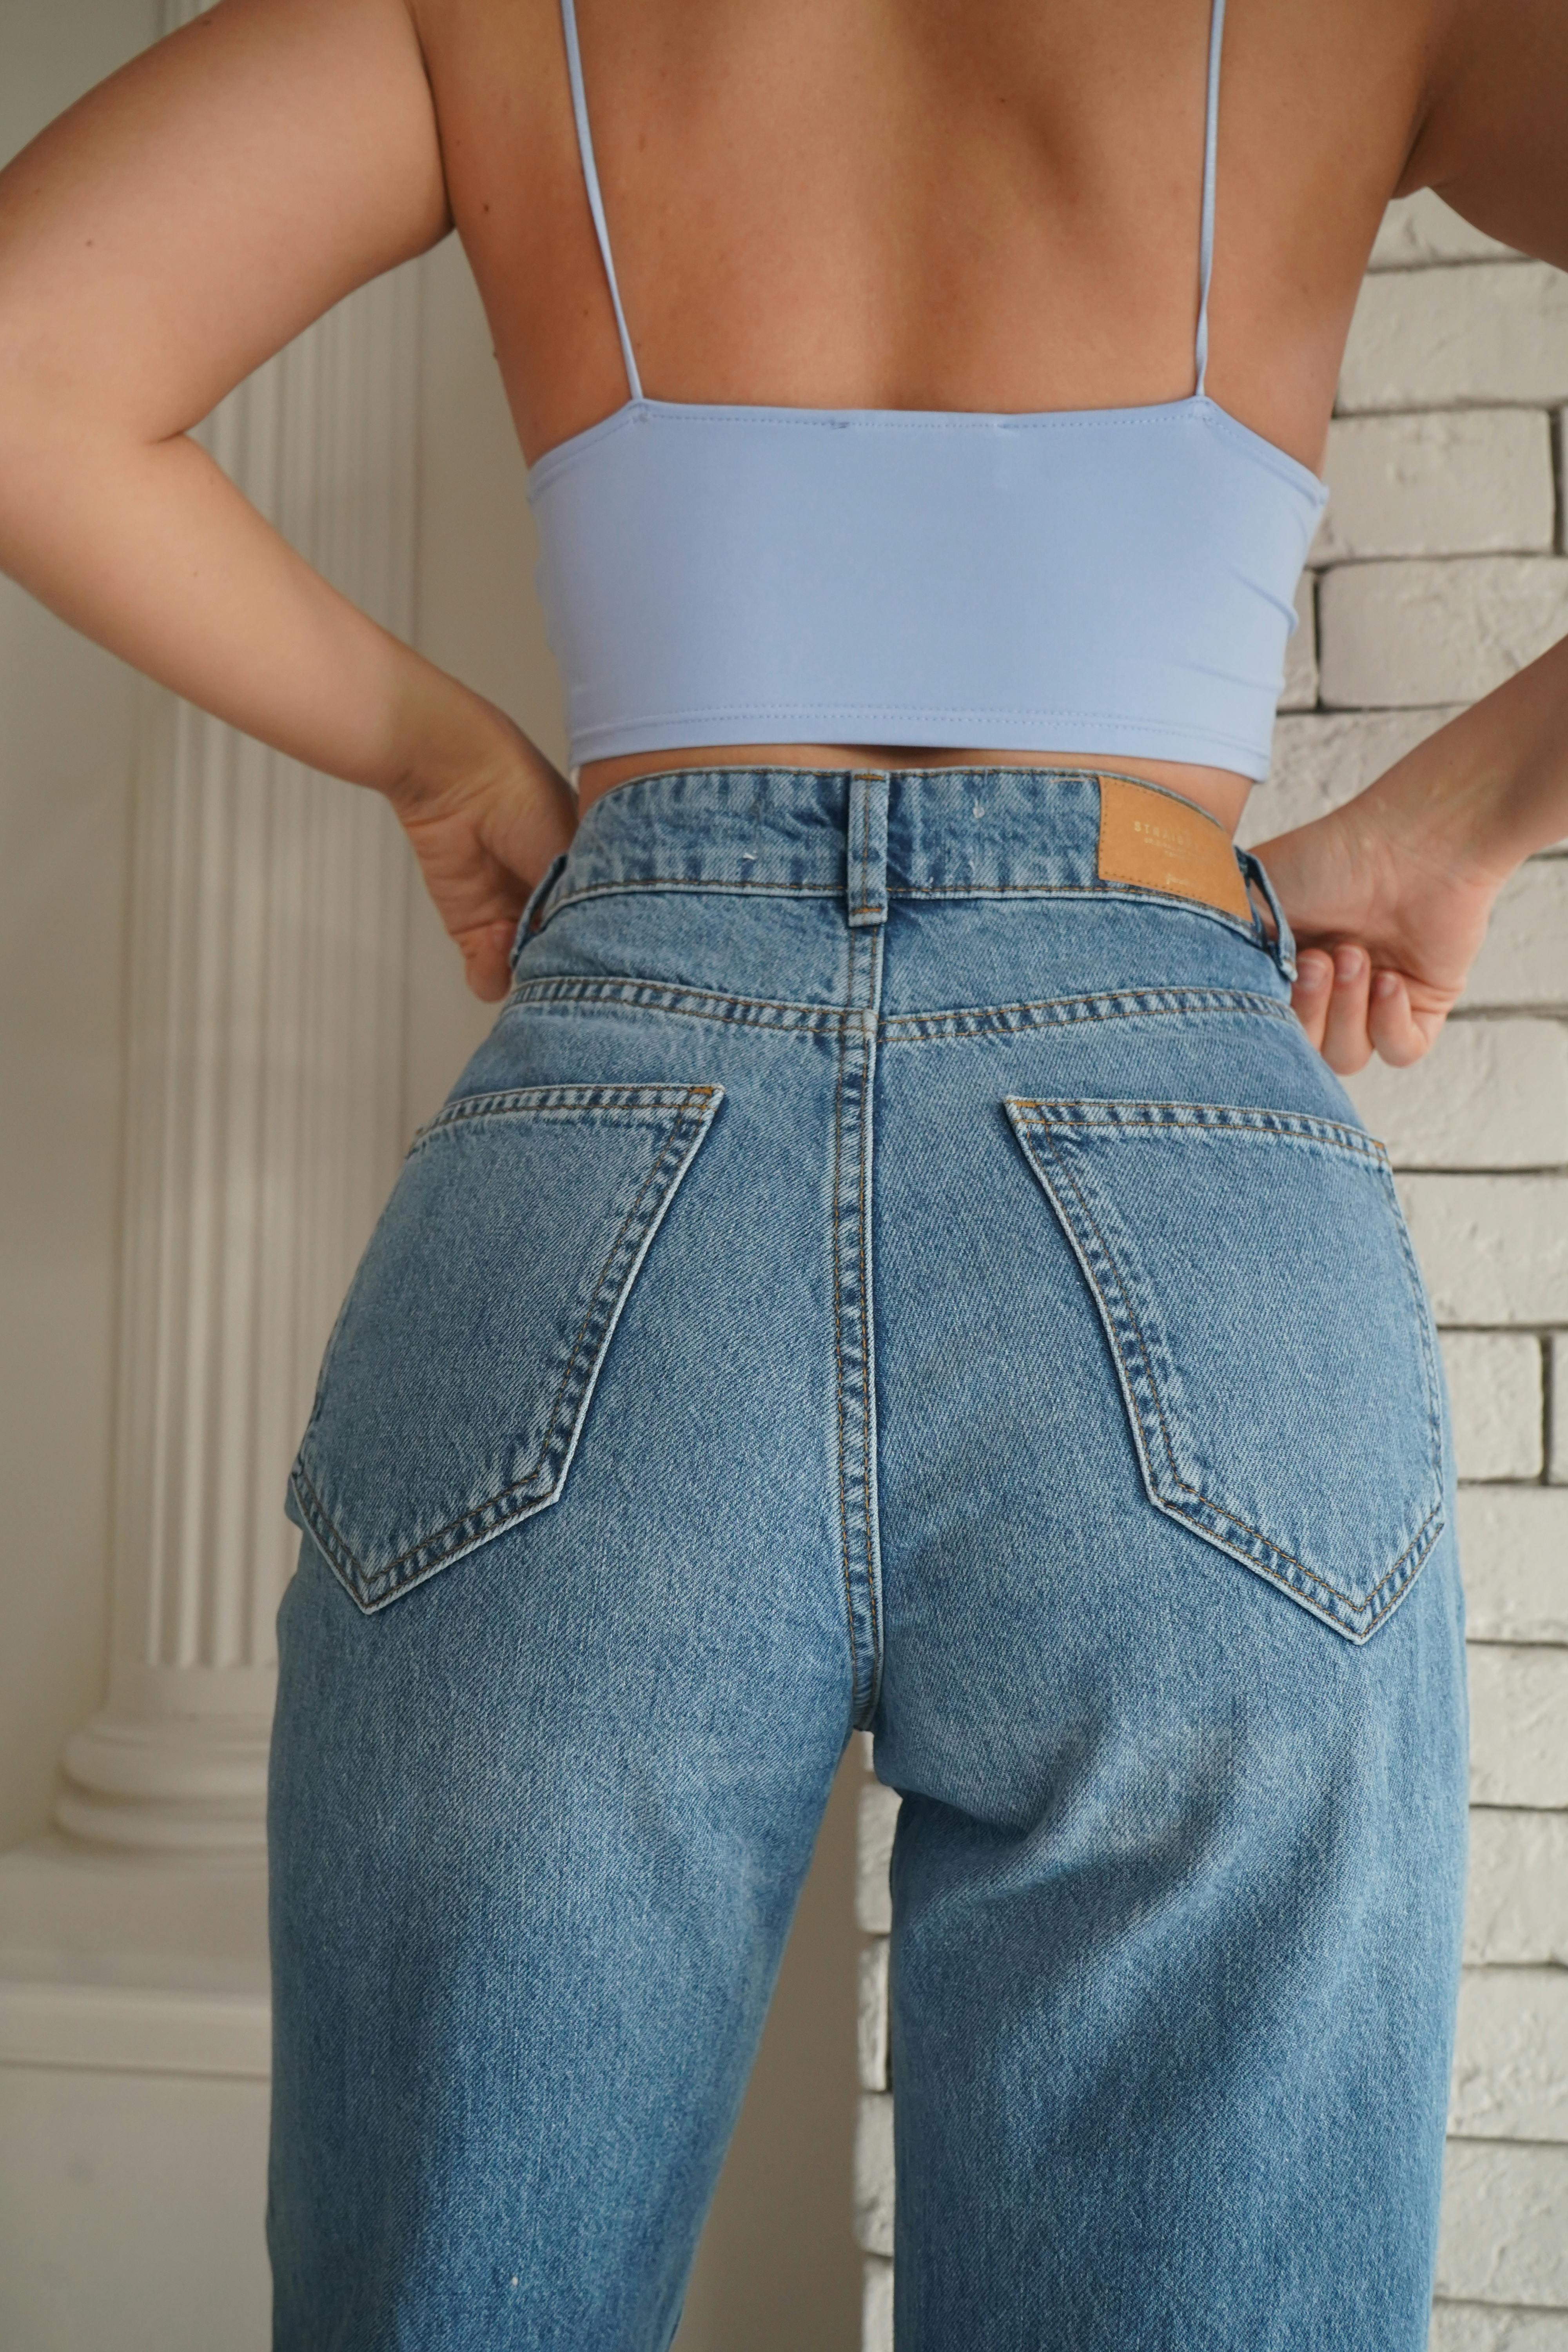 6,239 Crop Top Jeans Royalty-Free Photos and Stock Images